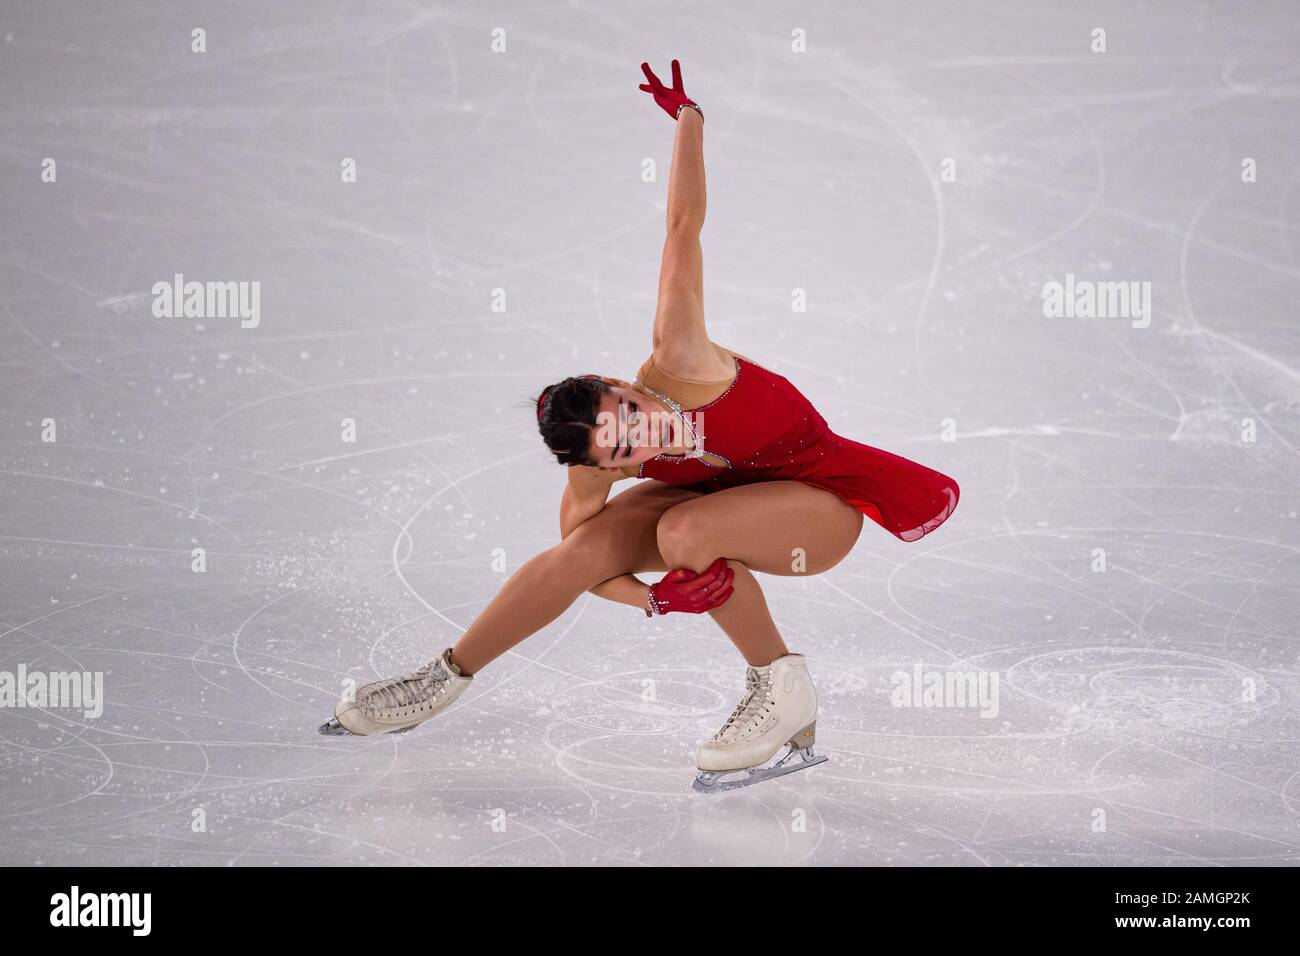 Lausanne, Switzerland. 13th, Jan 2020 TORNAGHI Alessia (ITA) competes in Figure Skating Women Free Dance during the Lausanne 2020 Youth Olympic Games at Vaudoise Arena on Monday, 13 January 2020. Lausanne, Switzerland. Credit: Taka G Wu/Alamy Live News Stock Photo